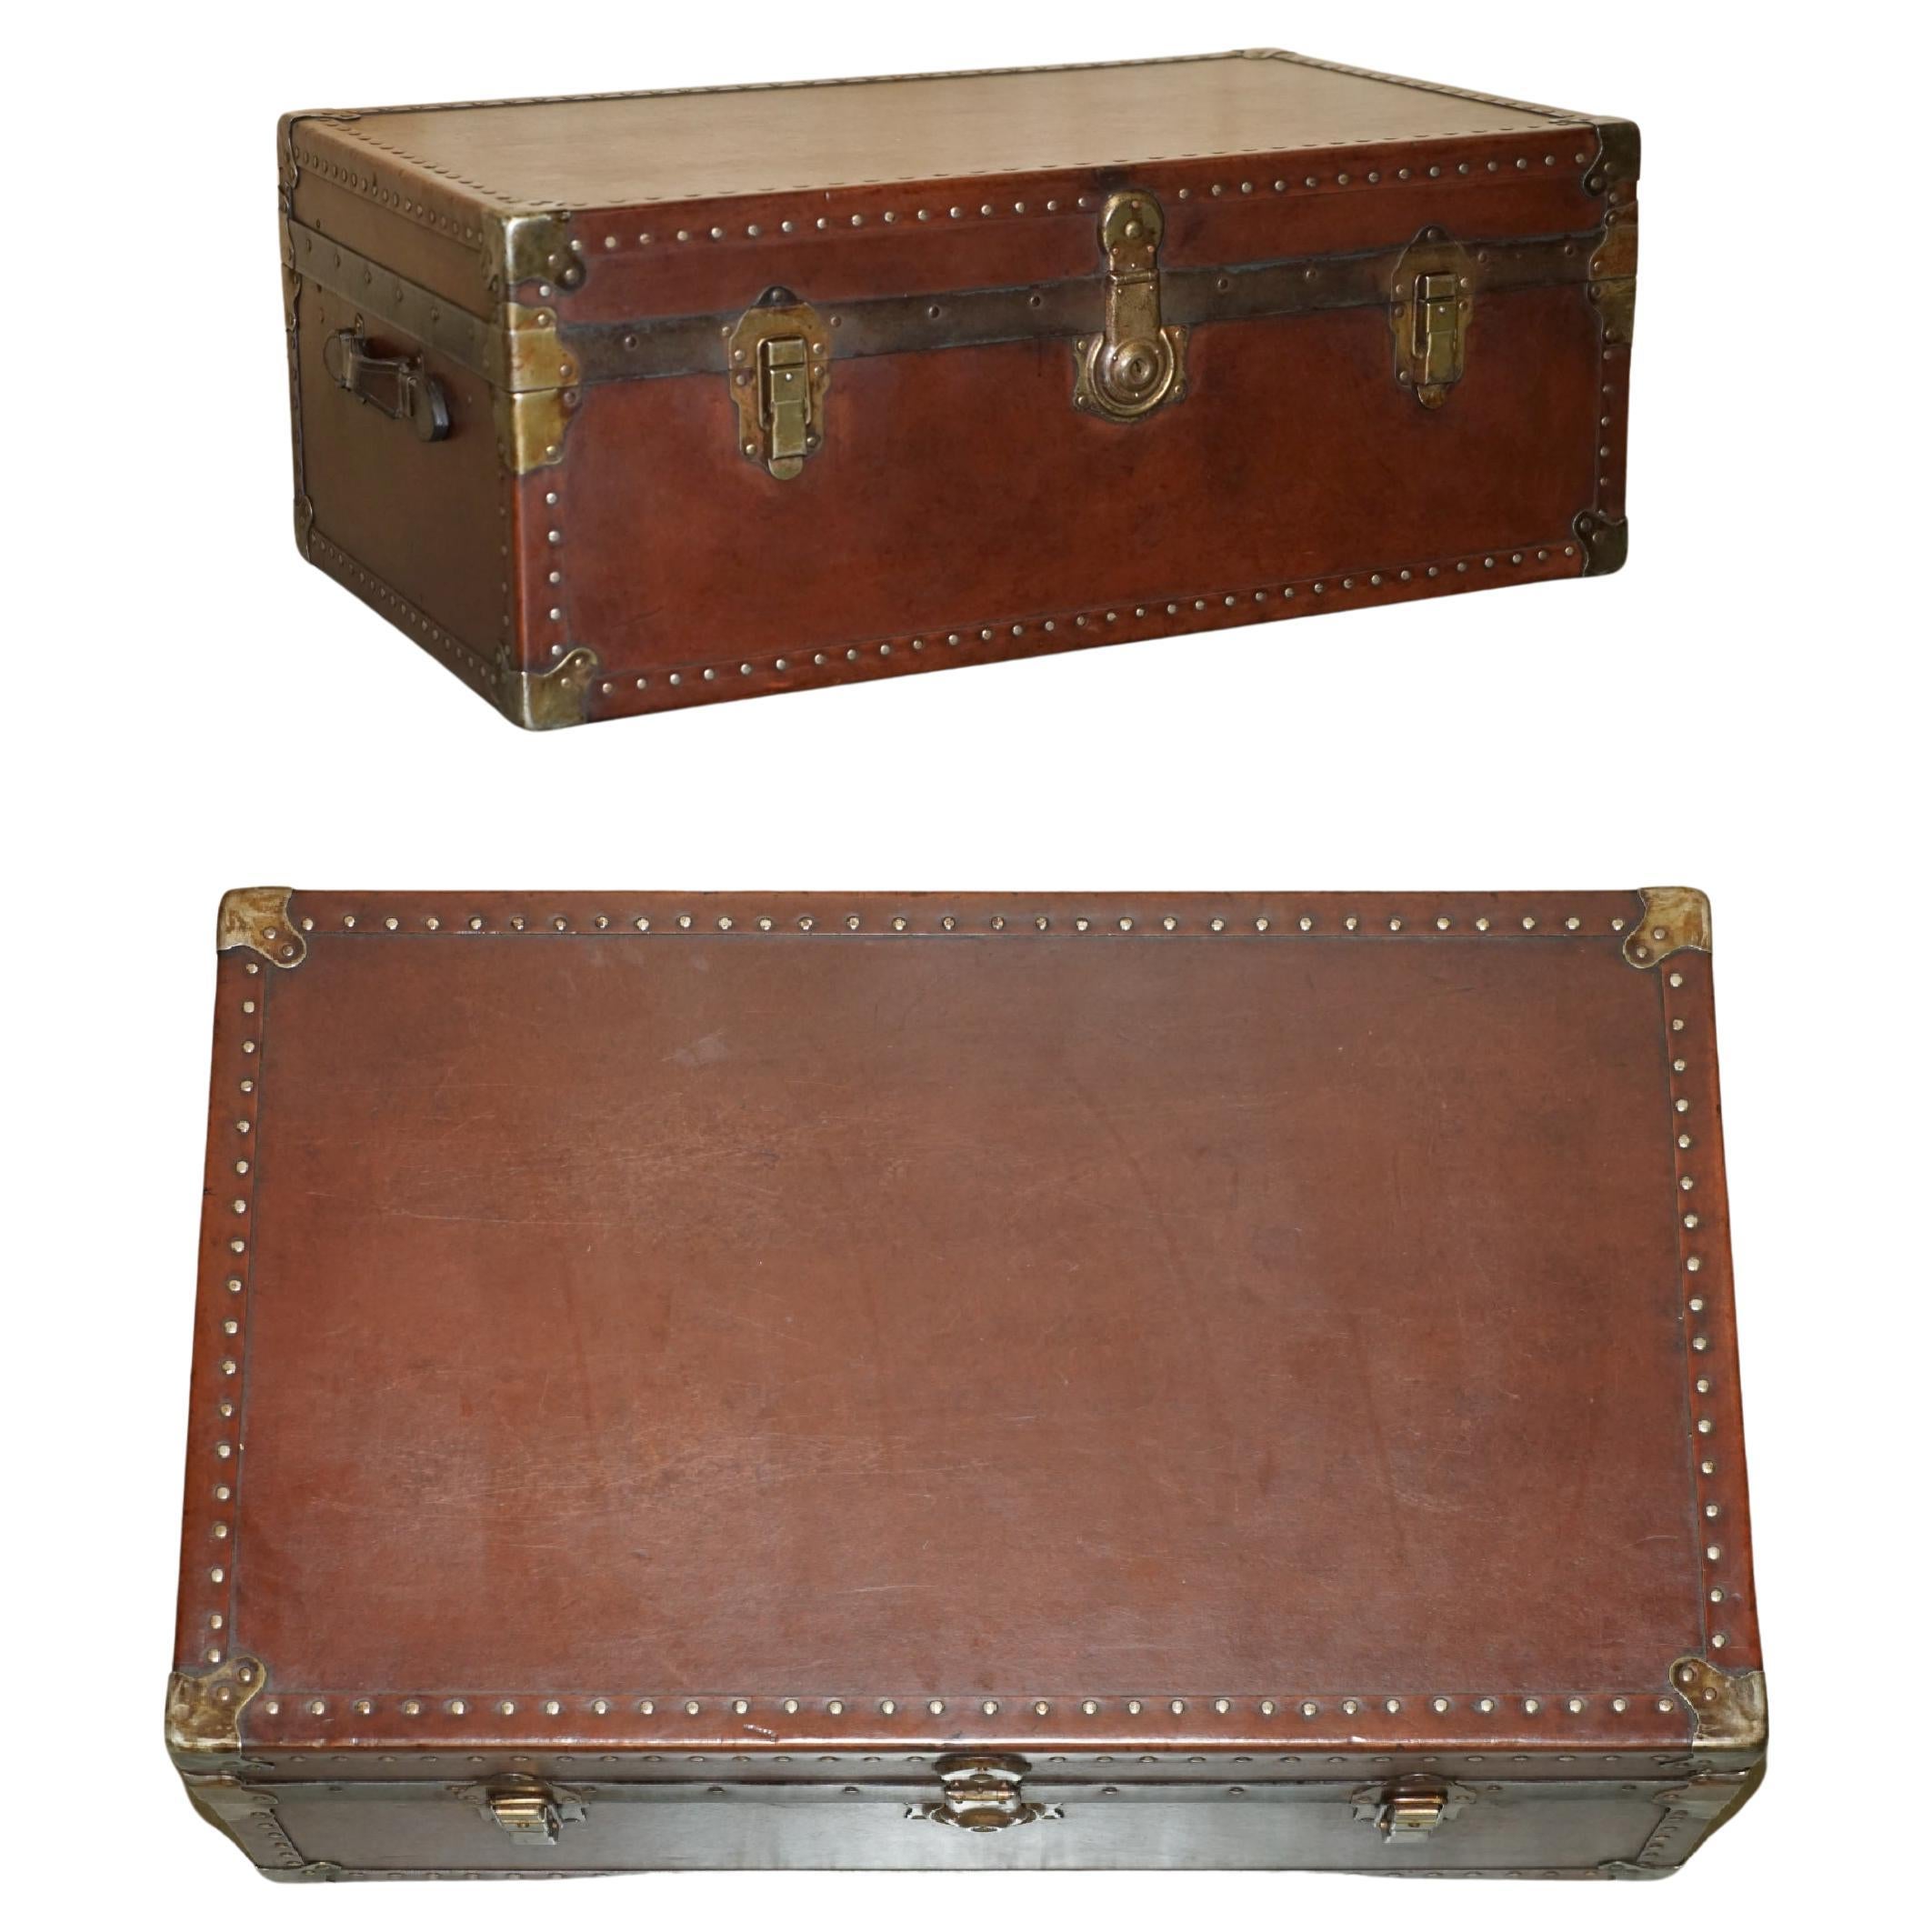 ANTIQUE BROWN LEATHER STEAMER TRUNK COFFEE TABLE WiTH REMOVABLE INTERNAL SHELF